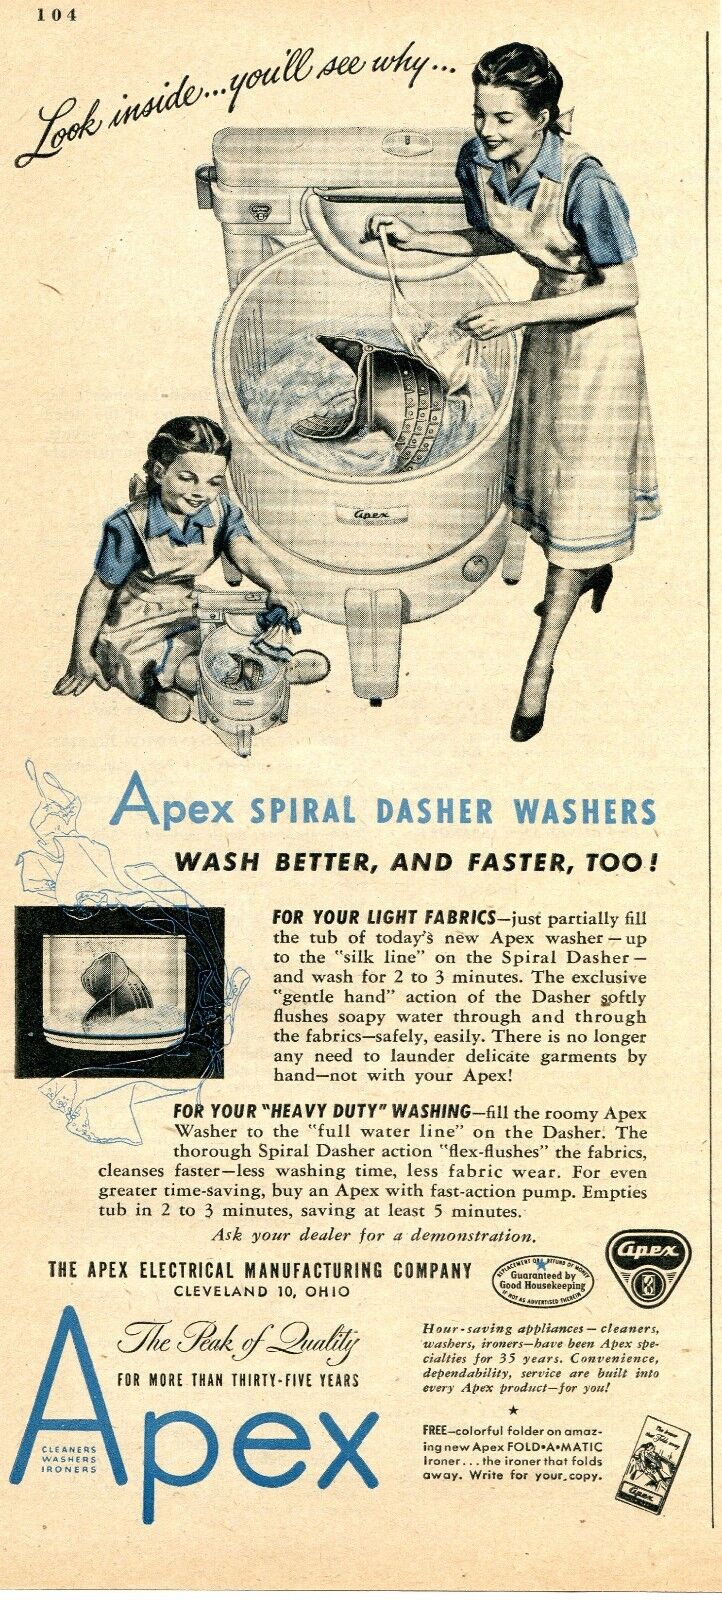 1948 Print Ad of Apex Spiral Dasher Washer Machine look inside... you\'ll see why